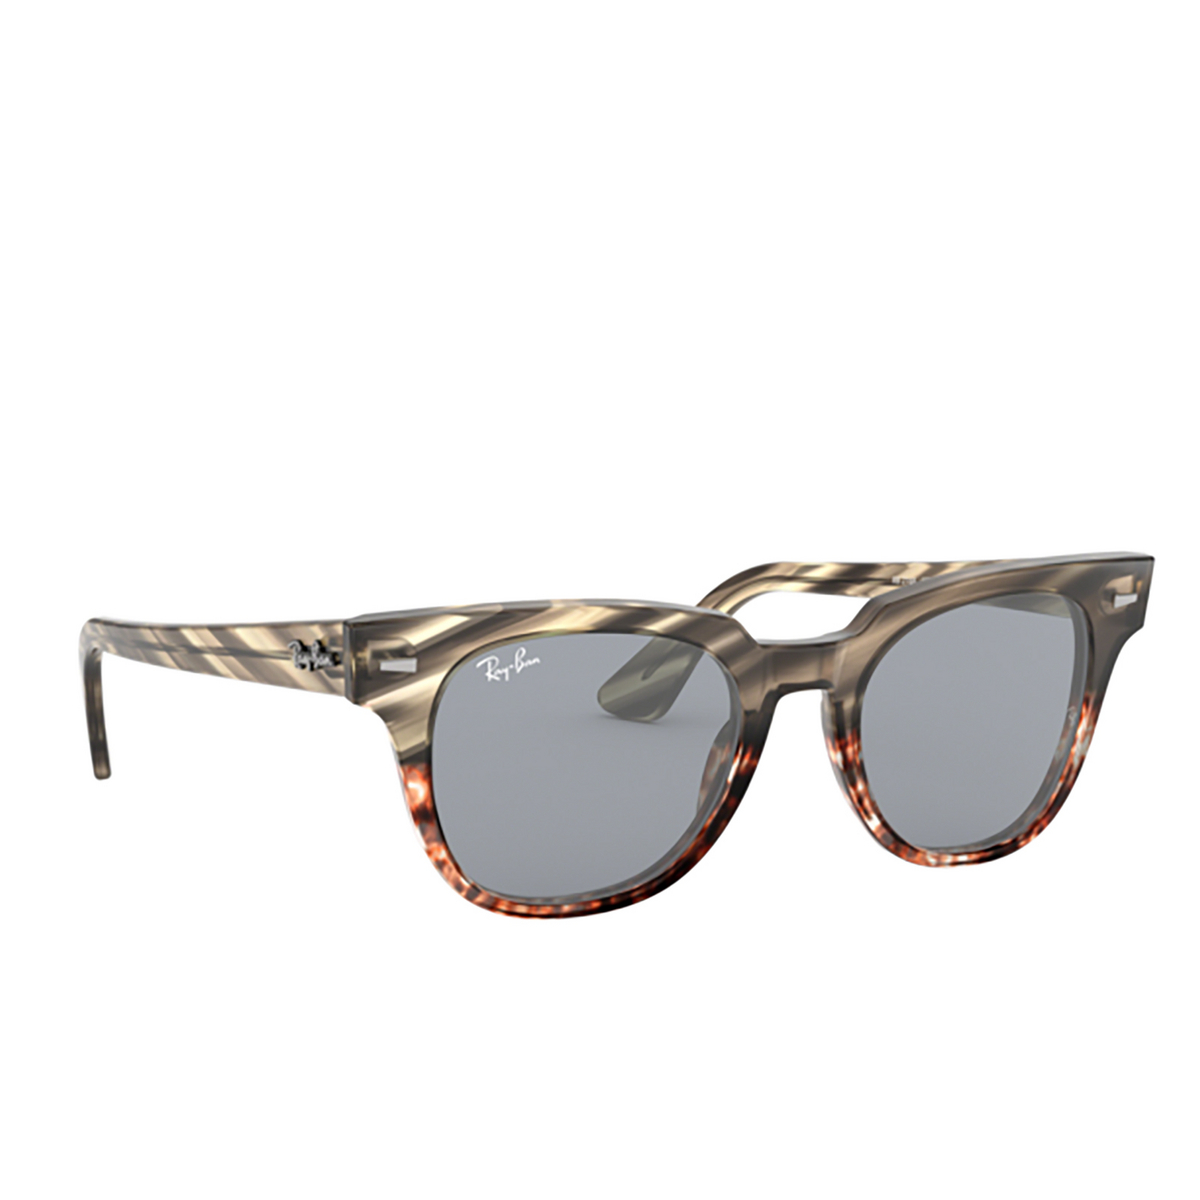 Ray-Ban® Square Sunglasses: Meteor RB2168 color Grey Gradient Brown Stripped 1254Y5 - three-quarters view.